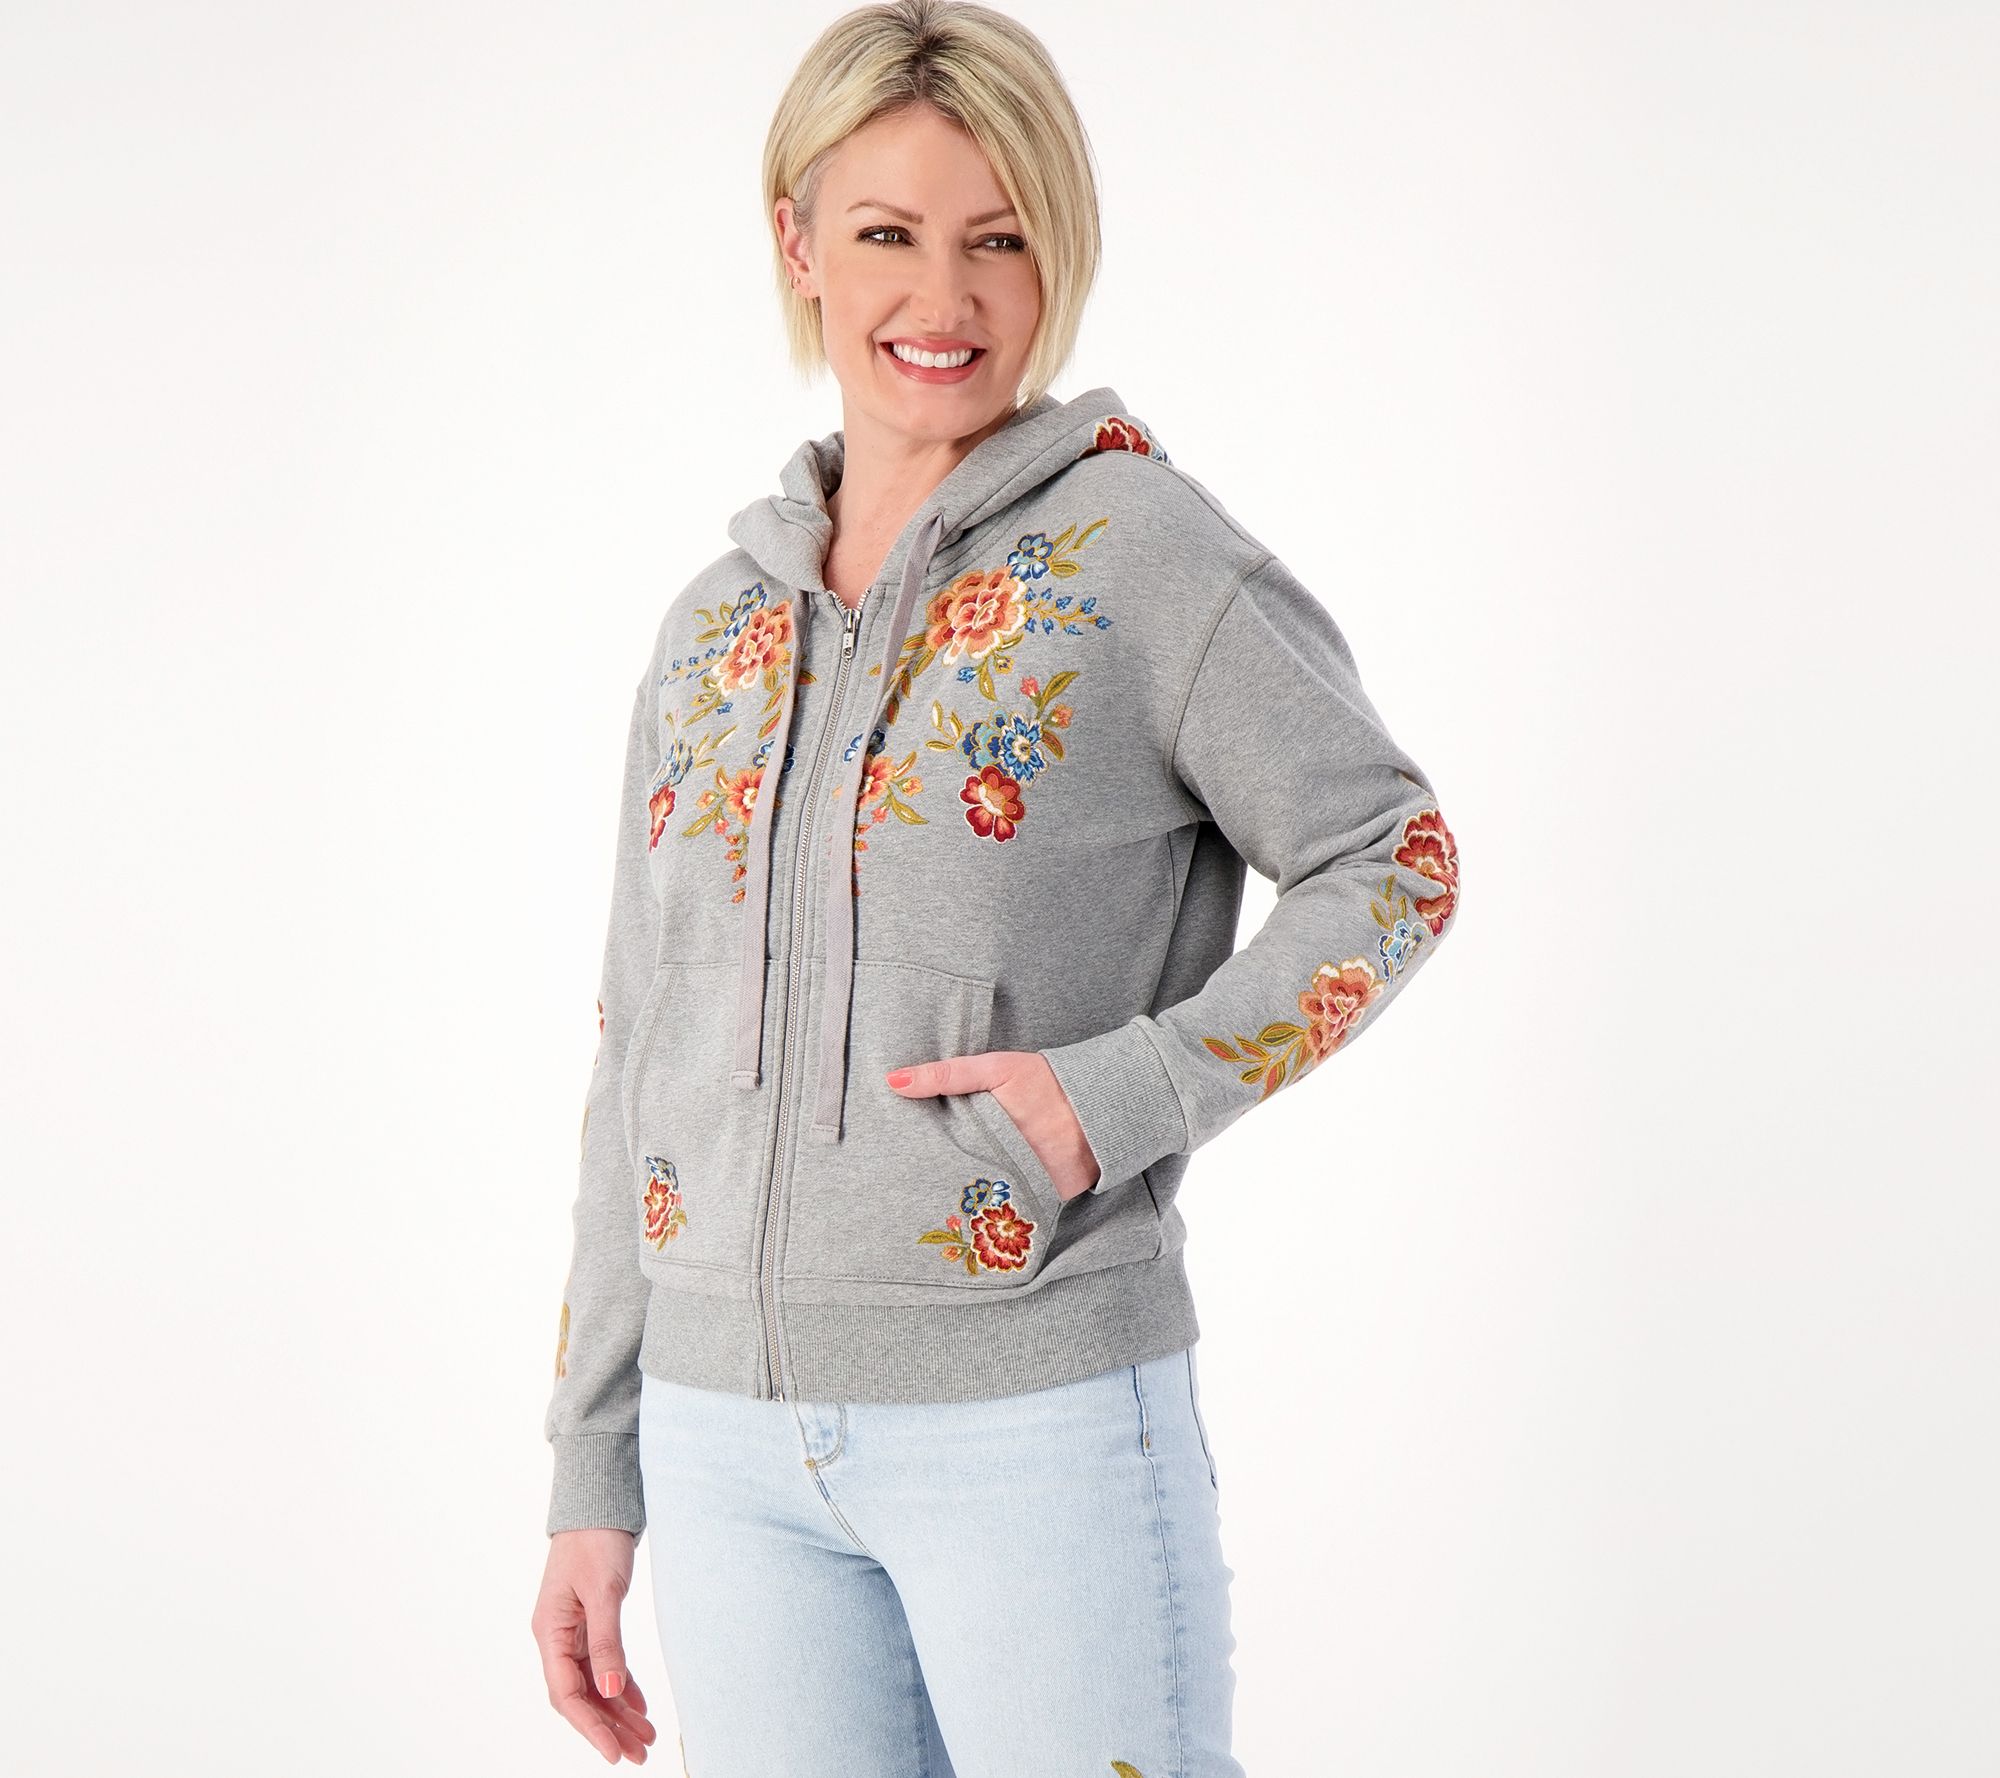 Driftwood Jeans Embroidered Zip-Up Hoodie- Maui 